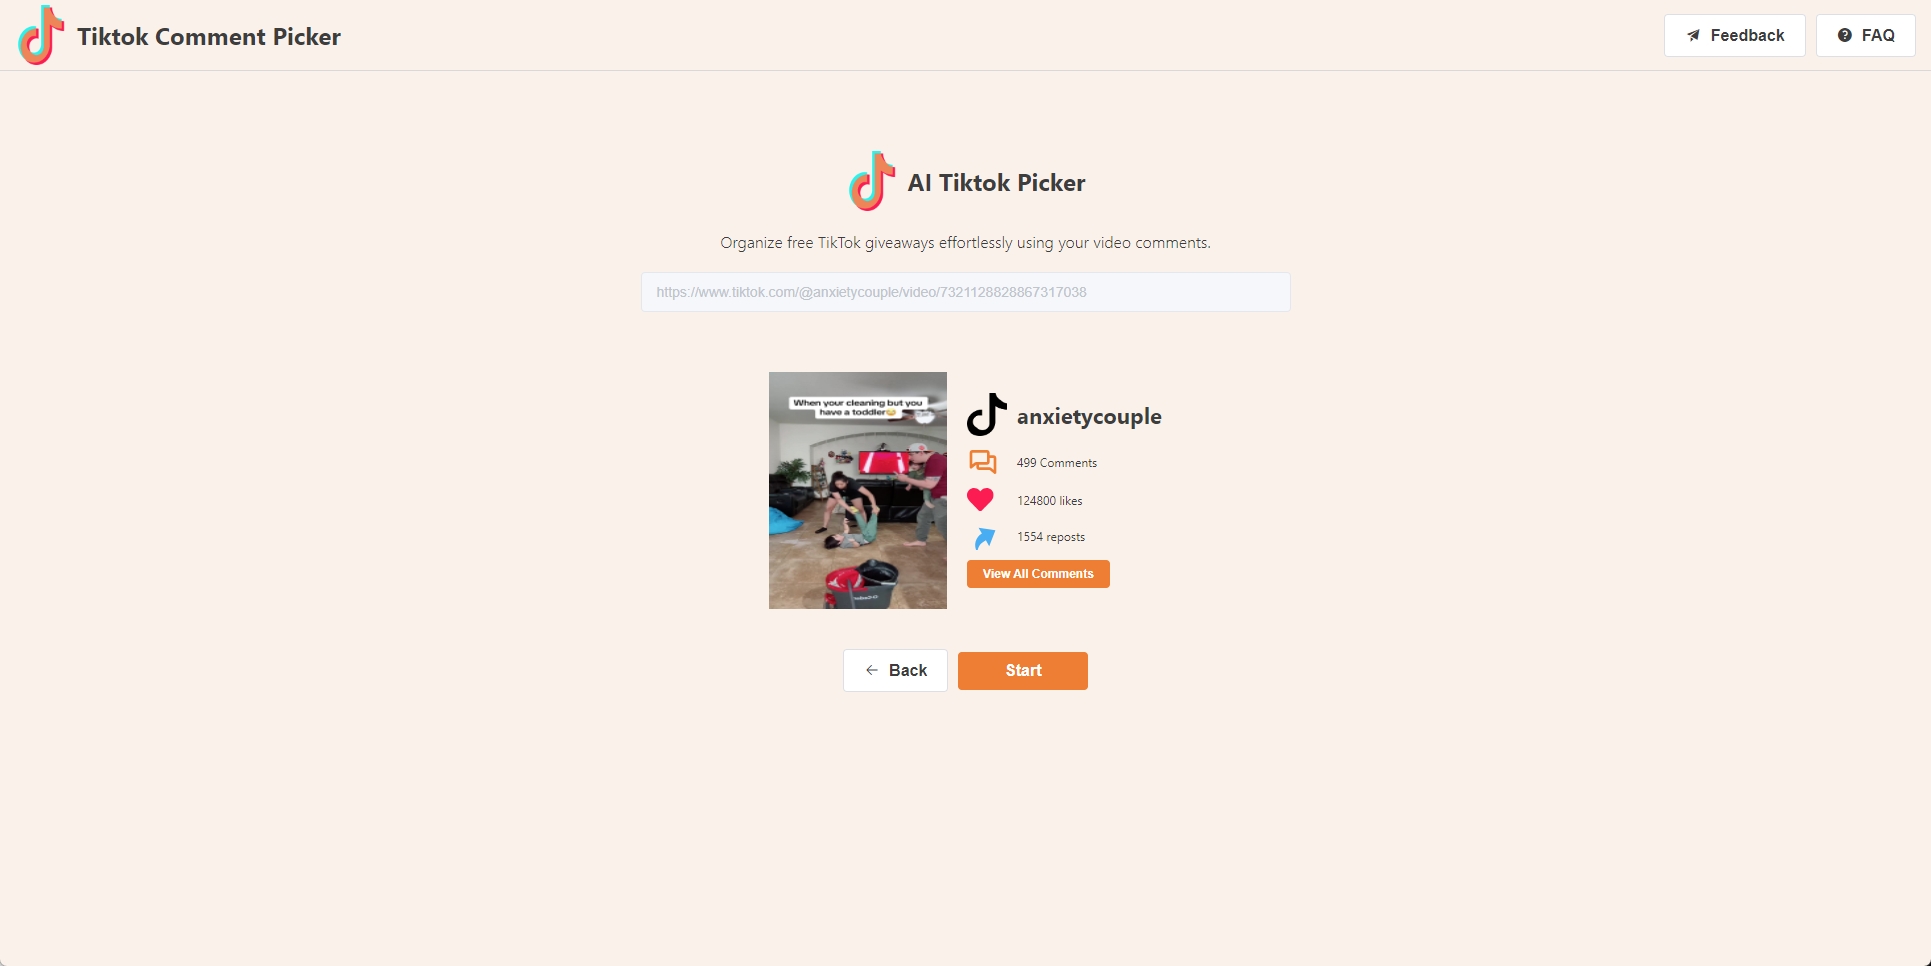 Tiktok Comment Picker Operation Page